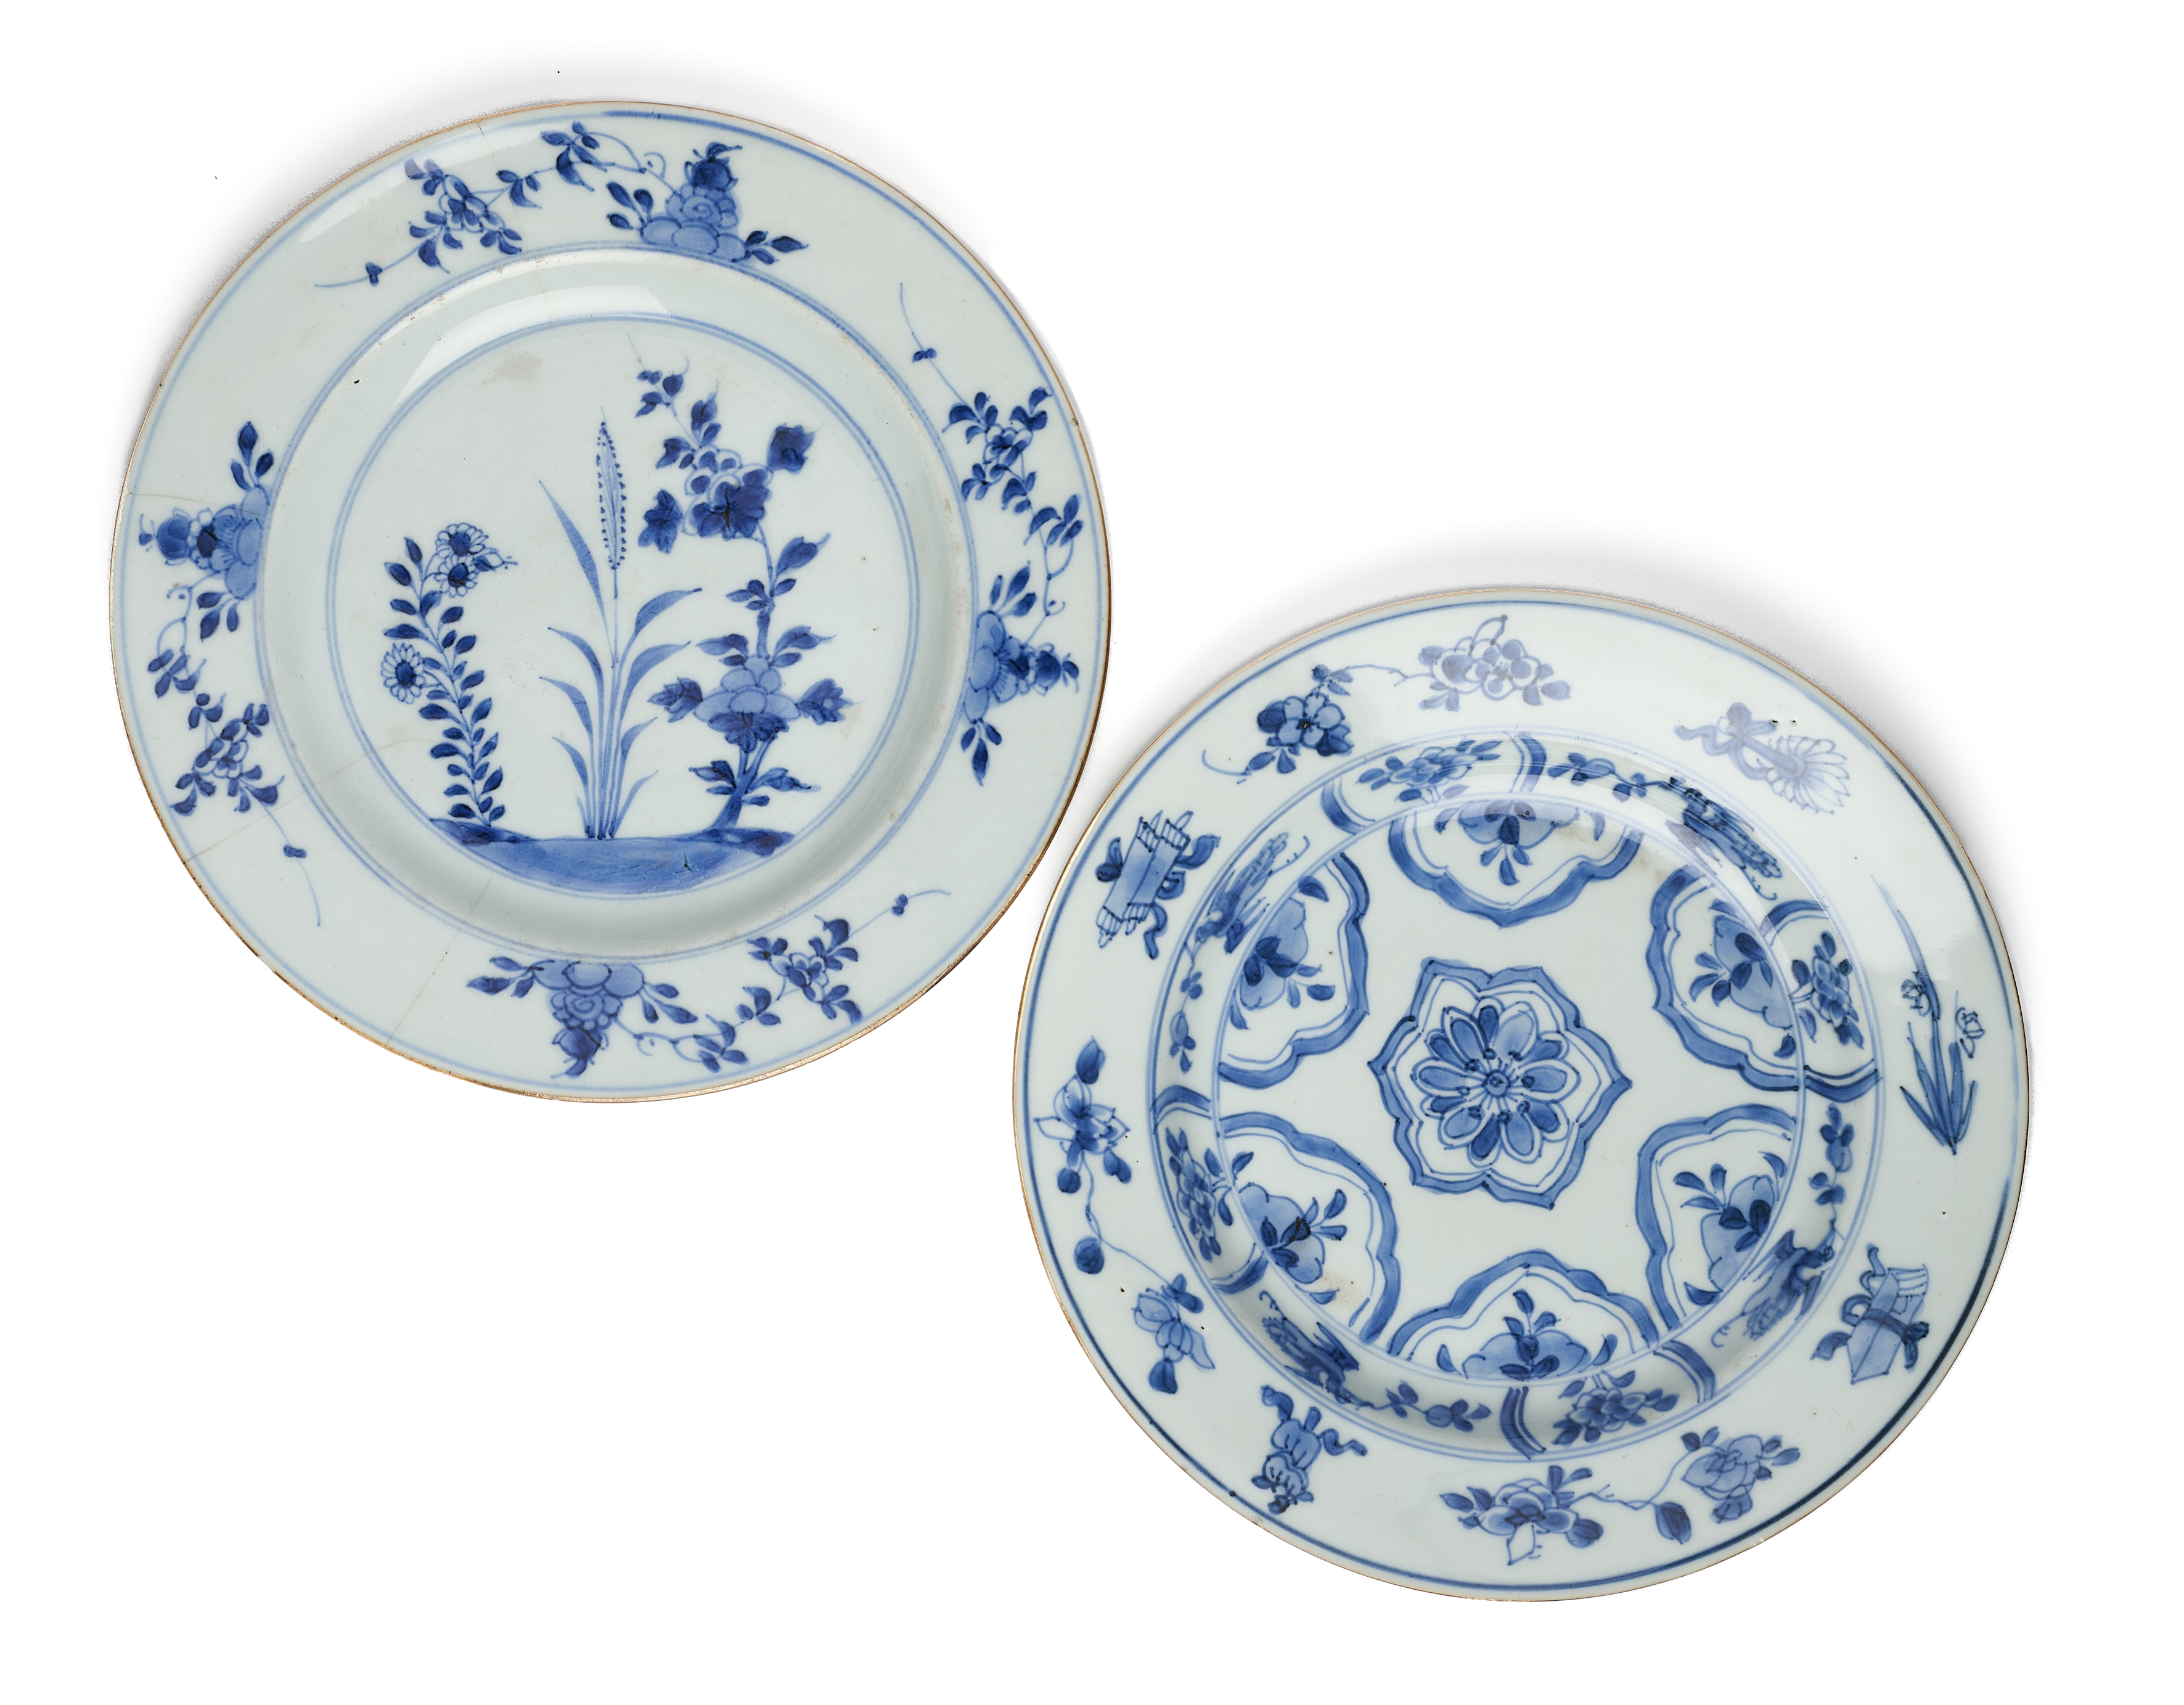 TWO CHINESE EXPORT BLUE AND WHITE PLATES, QING DYNASTY, KANGXI PERIOD (1662-1722)